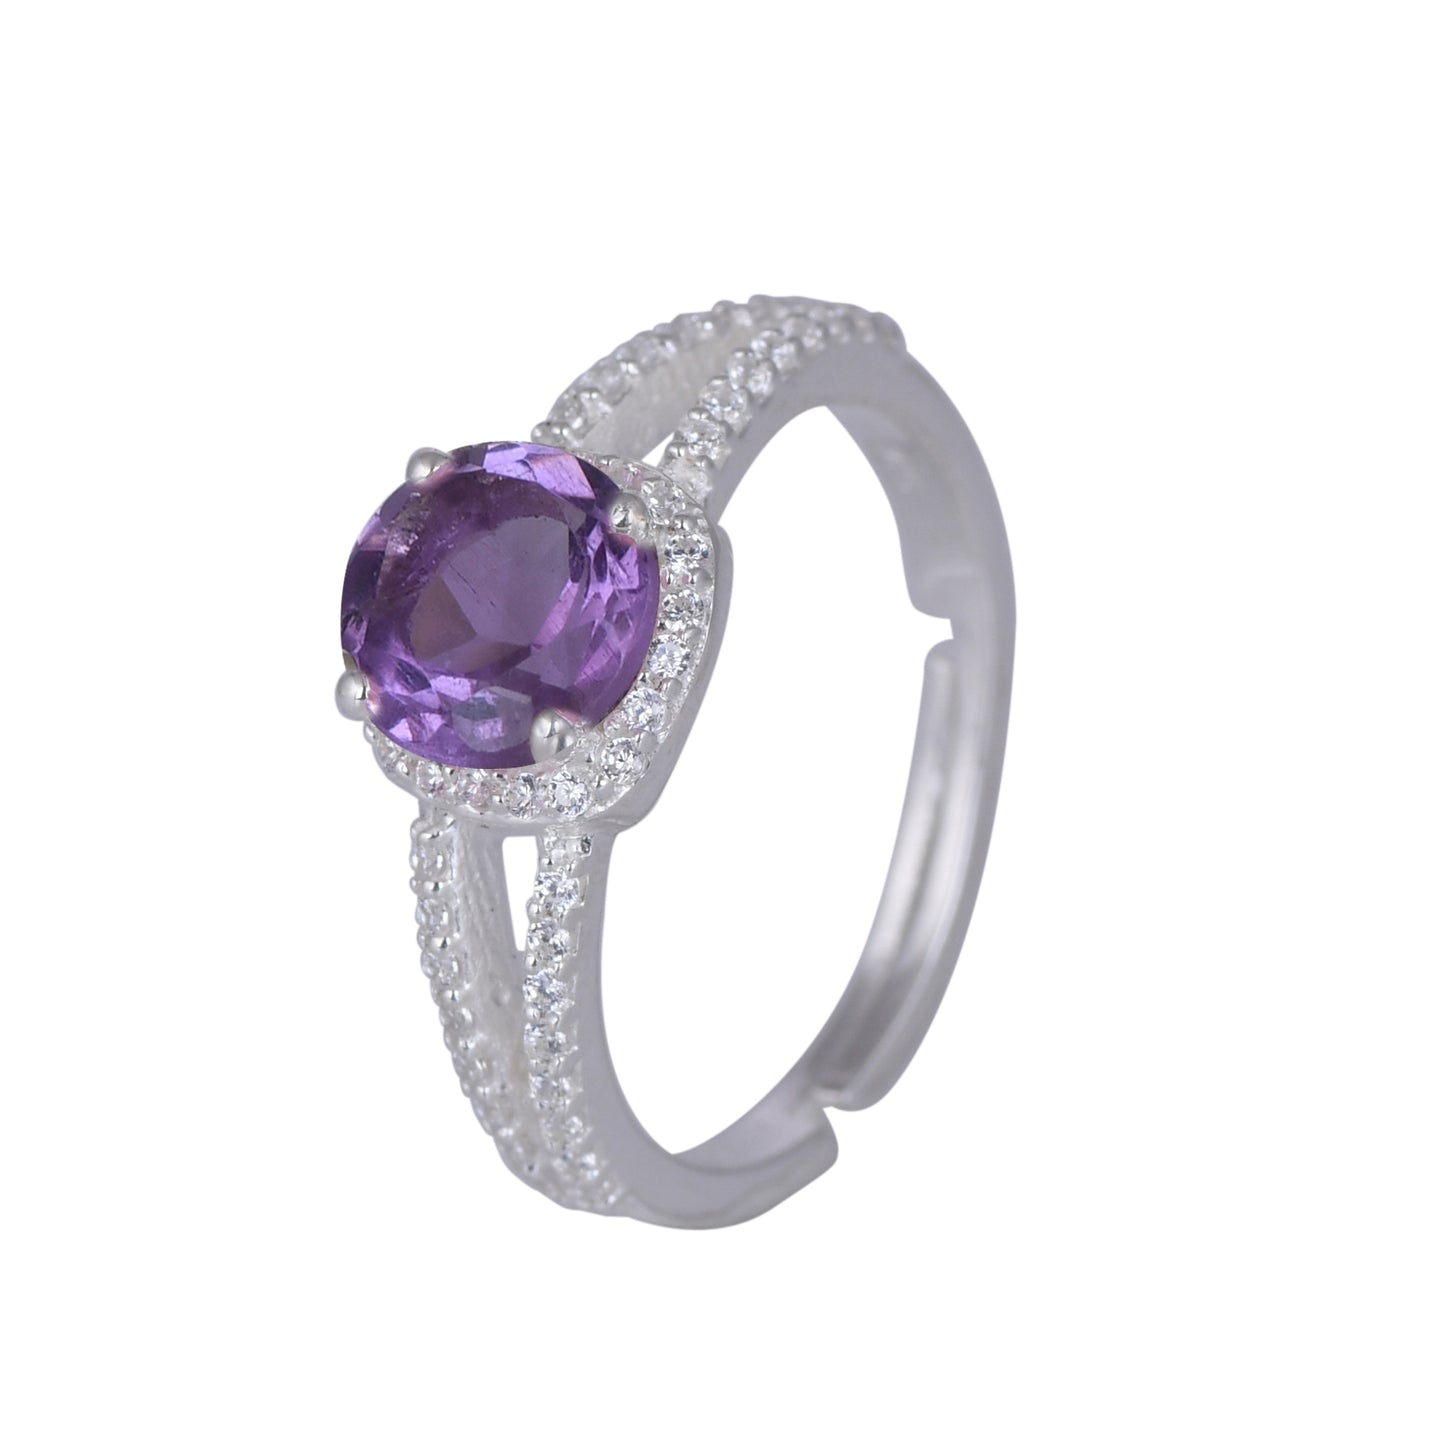 Natural Amethyst Gemstone Silver Ring - From Purl Purl